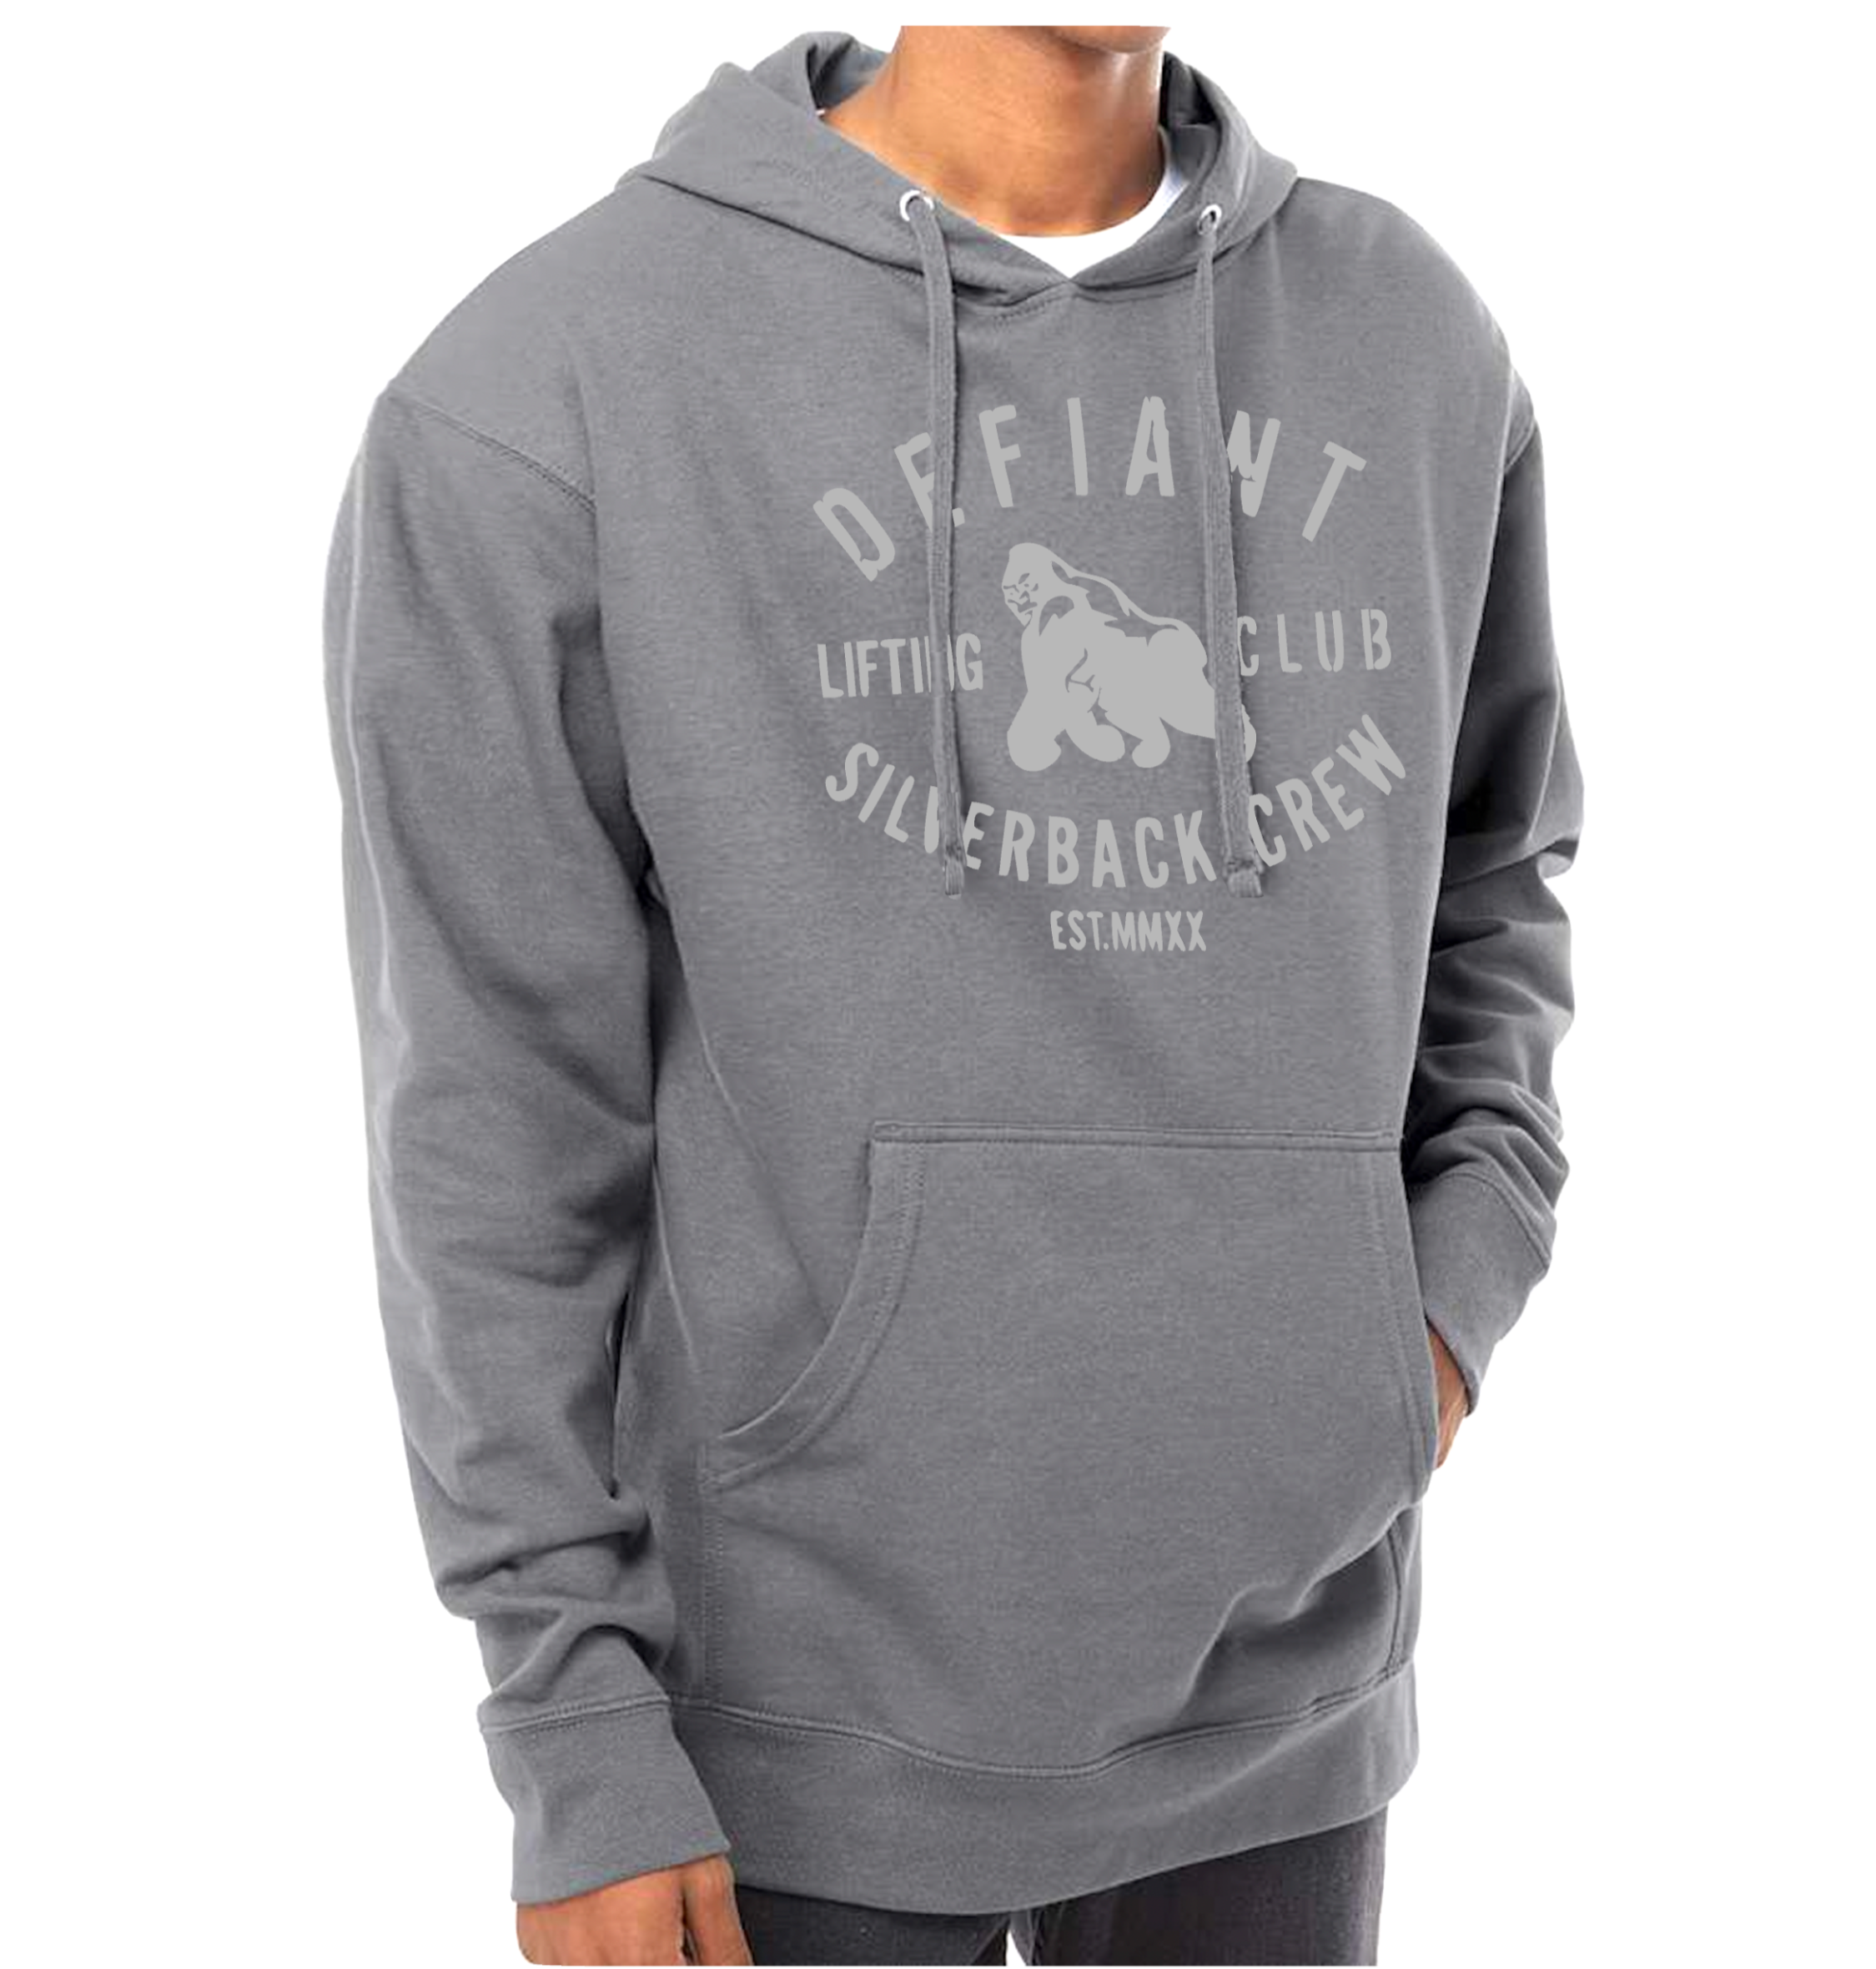 NEW - SILVER SILVERBACK MIDWEIGHT HOODIE - GUNMETAL GRAY - LIMITED SIZES